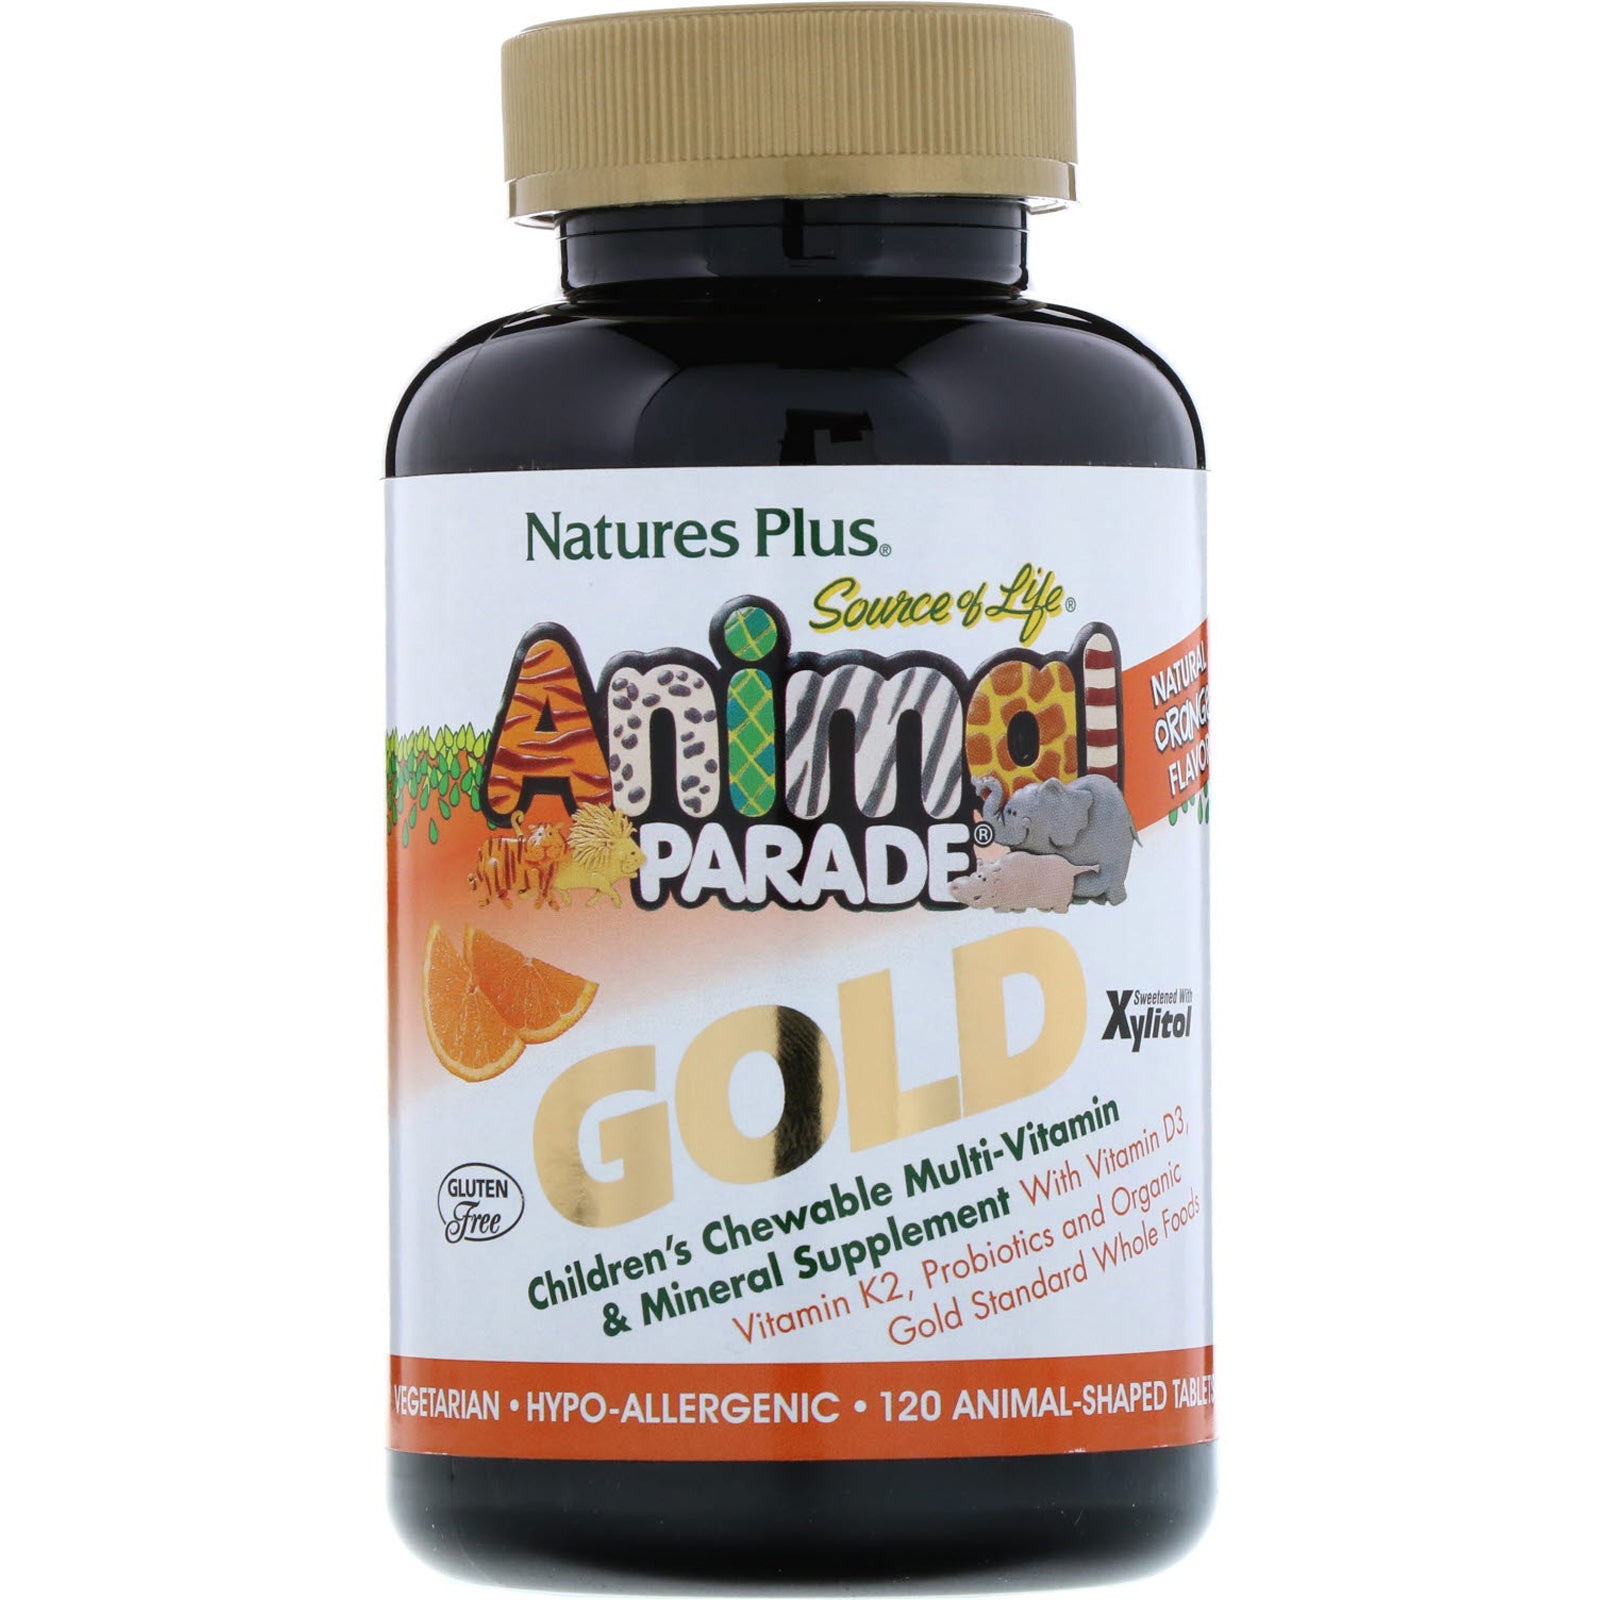 Nature's Plus, Source of Life, Animal Parade Gold, Children's Chewable Multi-Vitamin & Mineral Supplement, Natural Orange Flavor, 120 Animal Shaped Tablets